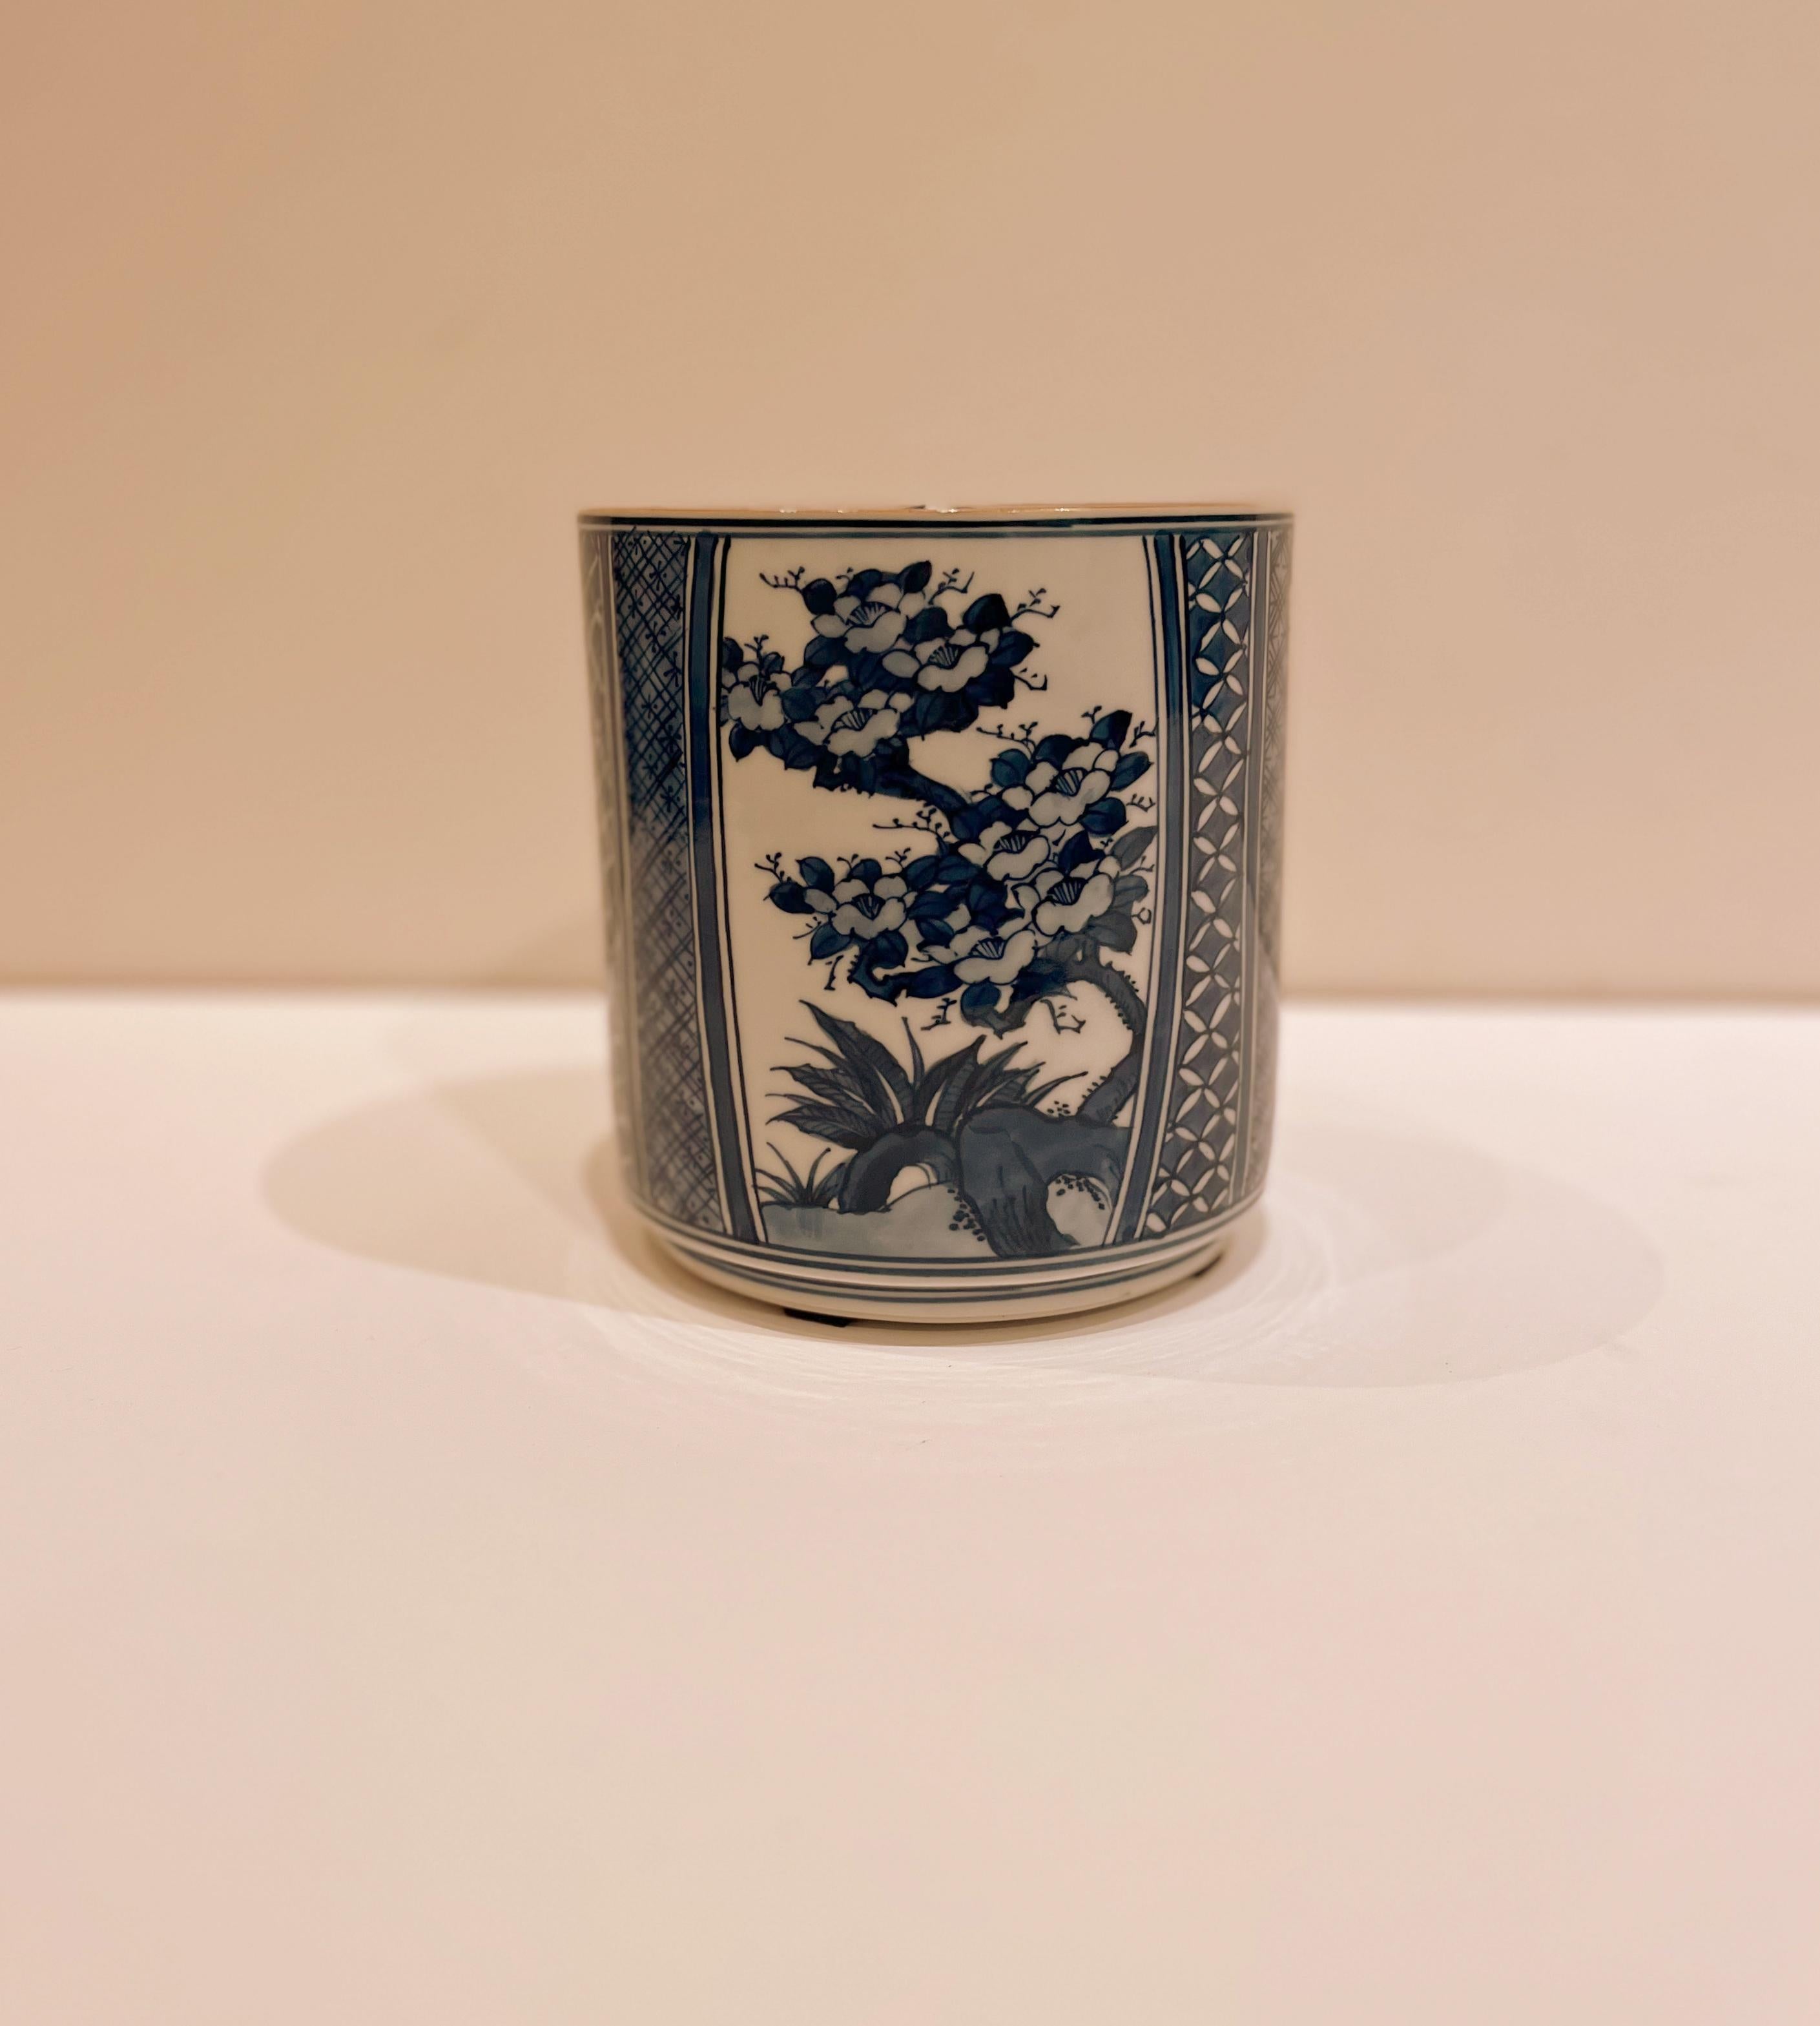 Japanese blue and white porcelain oval shape tea caddy with floral motif on the body and cover. Longevity character motif on inside the cover